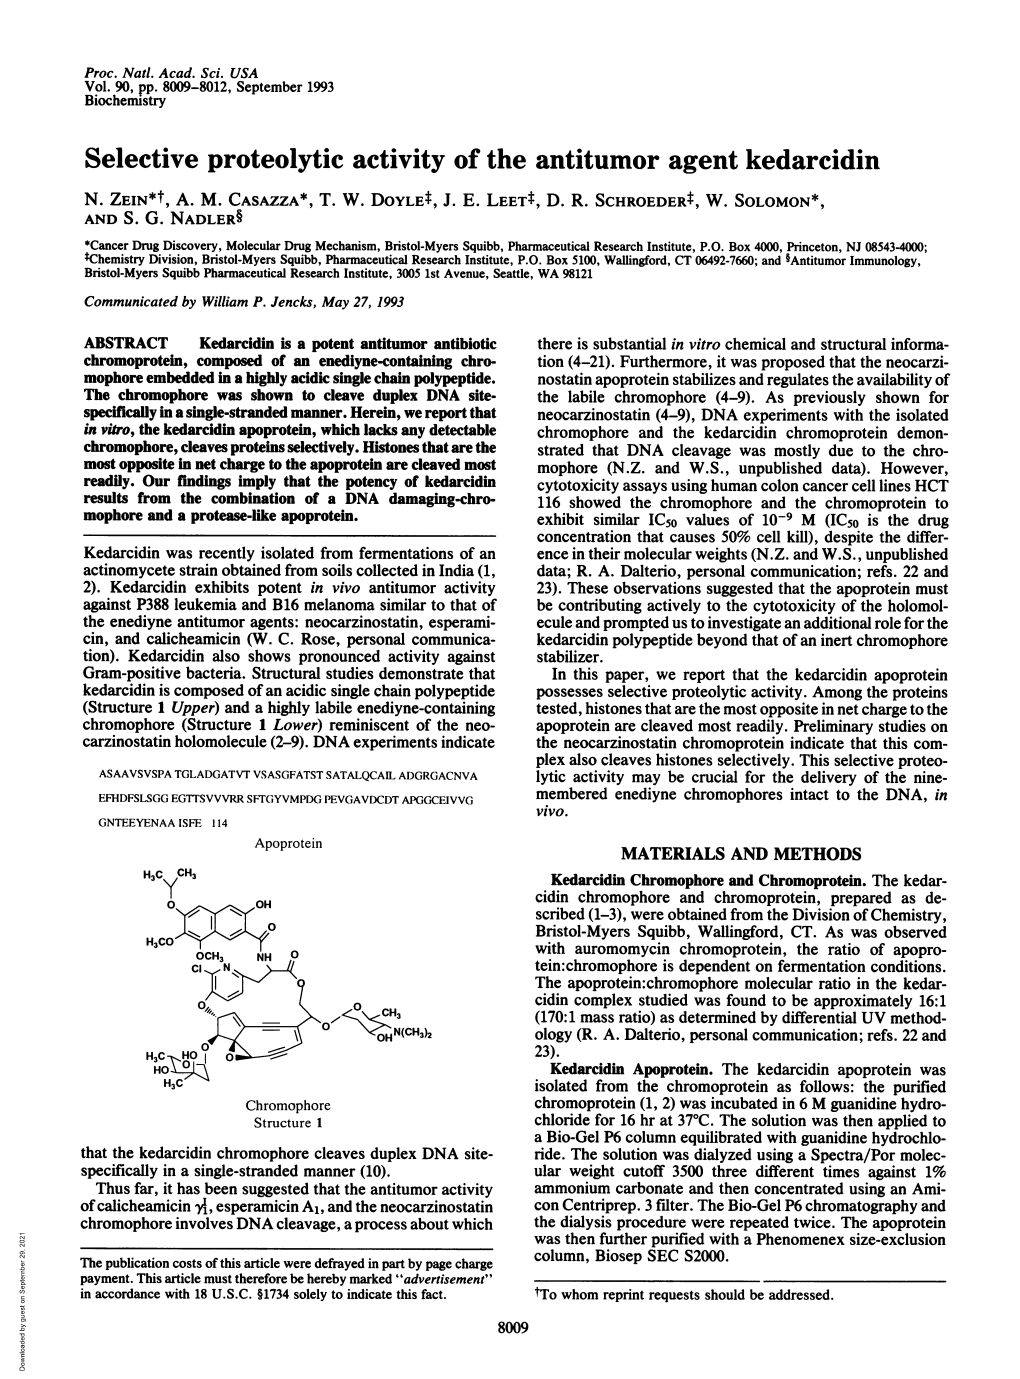 Selective Proteolytic Activity of the Antitumor Agent Kedarcidin N